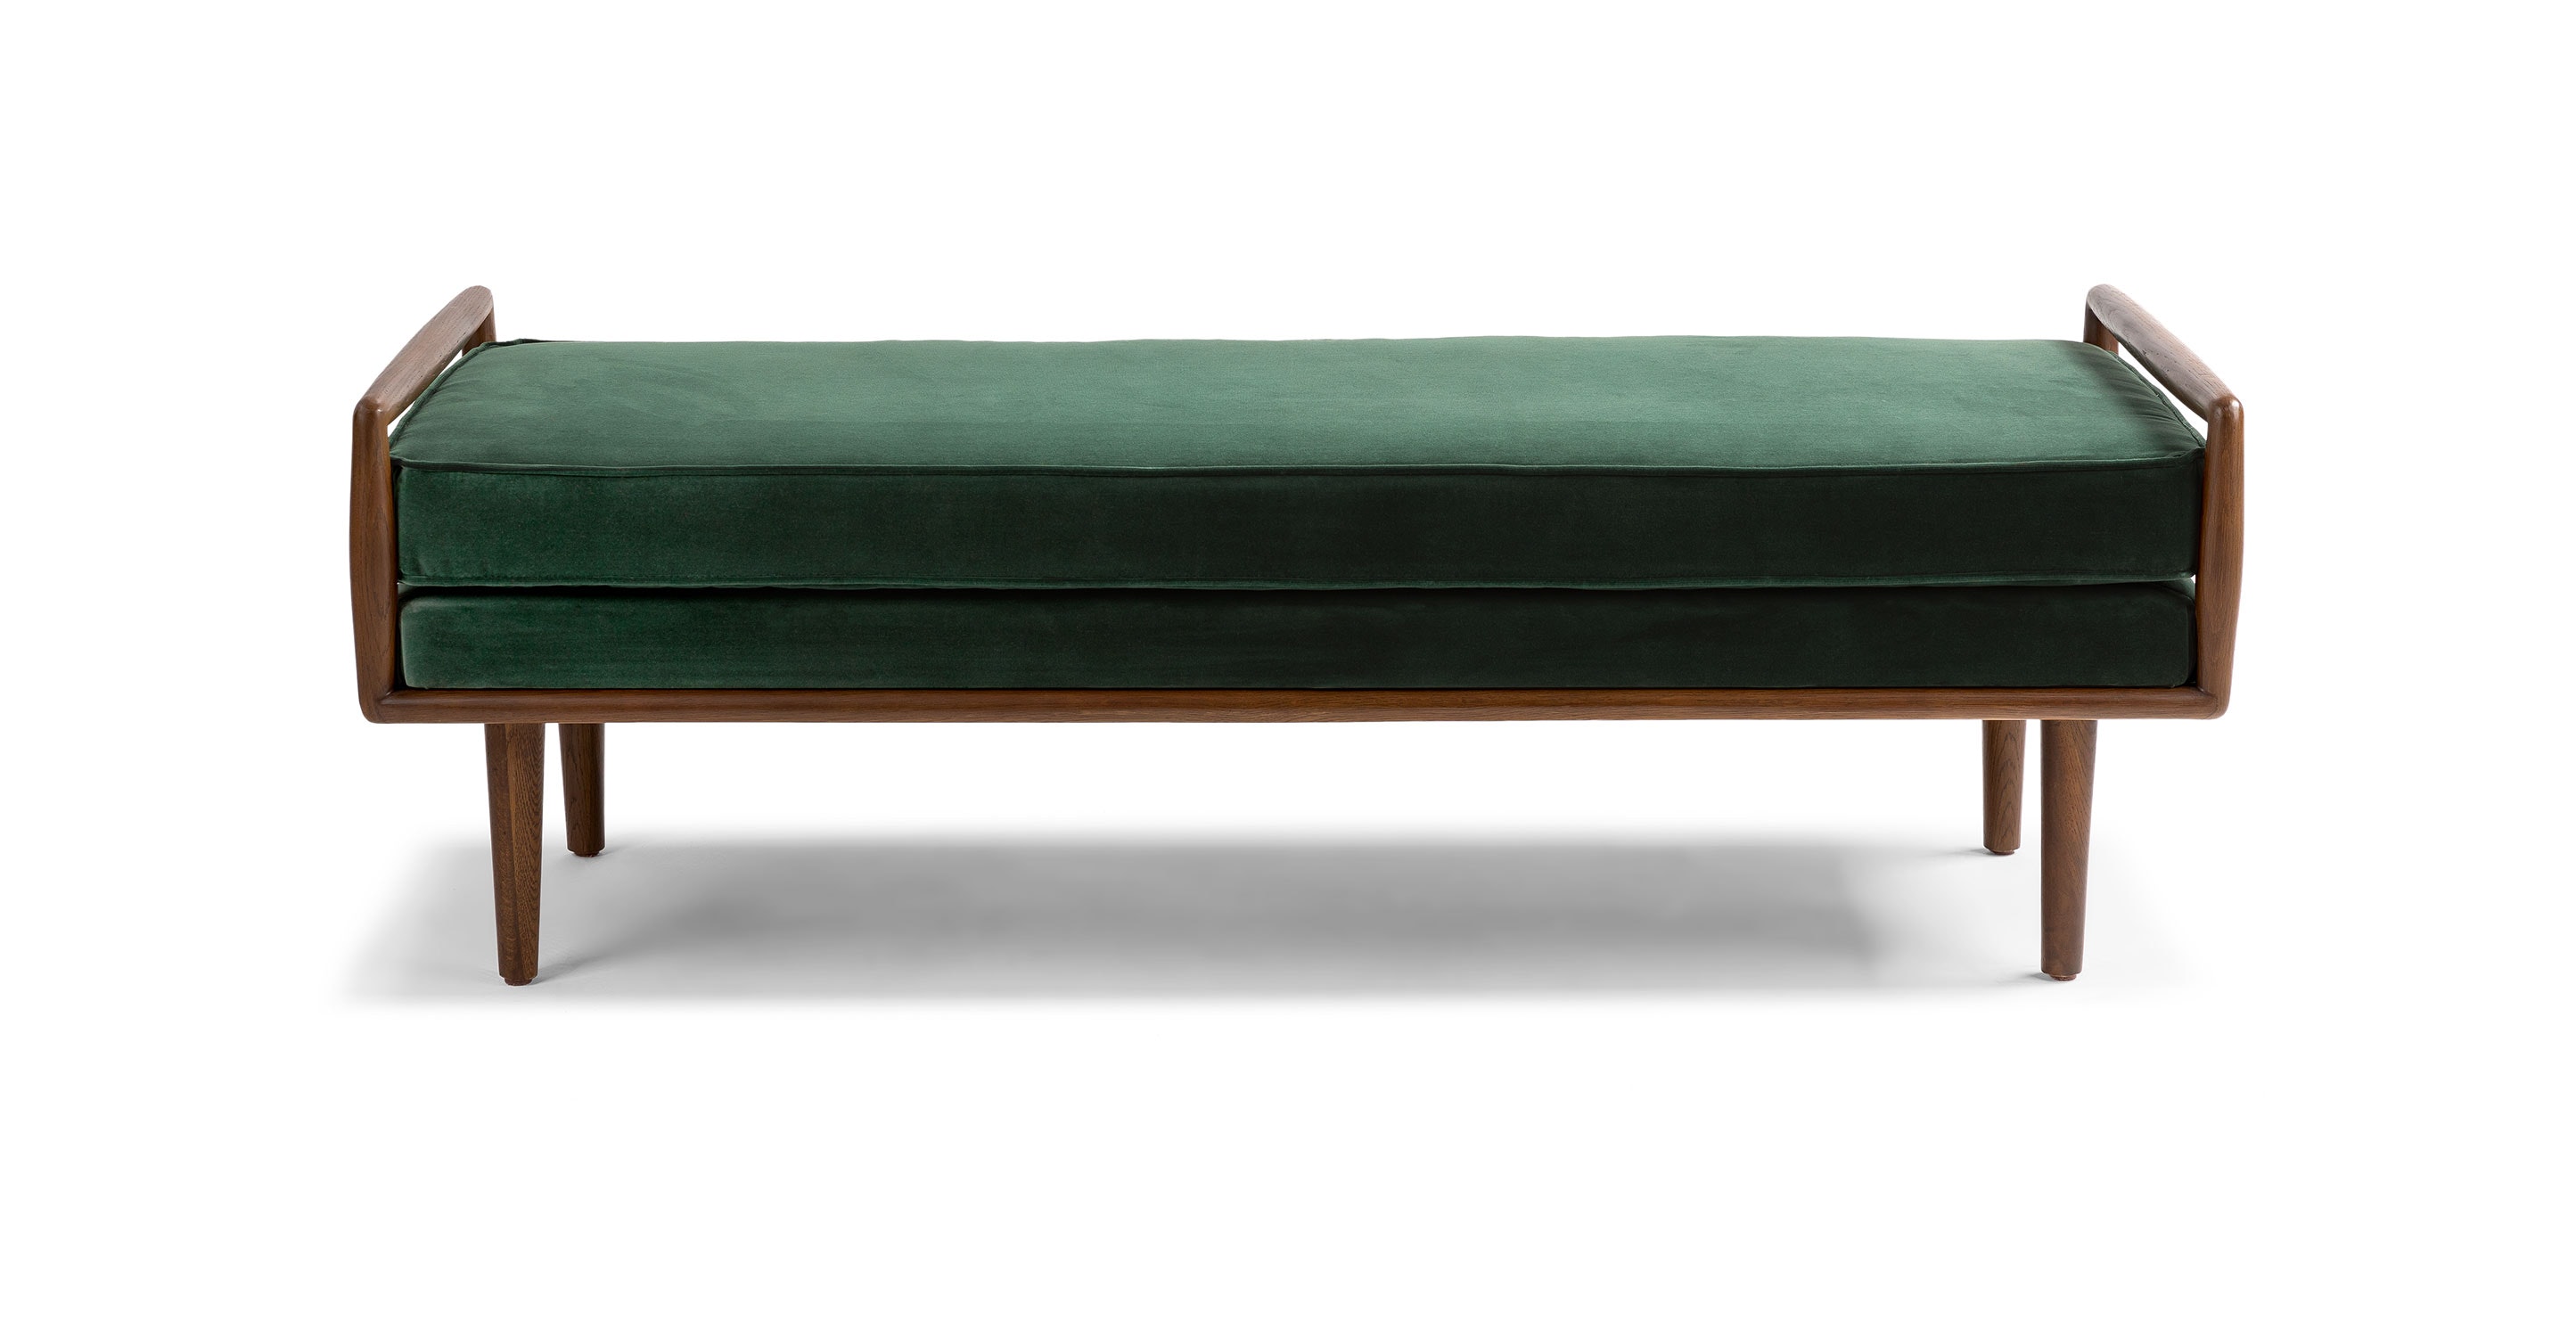 Ansa Balsam Green Bench - Benches - Article | Modern, Mid-Century ...